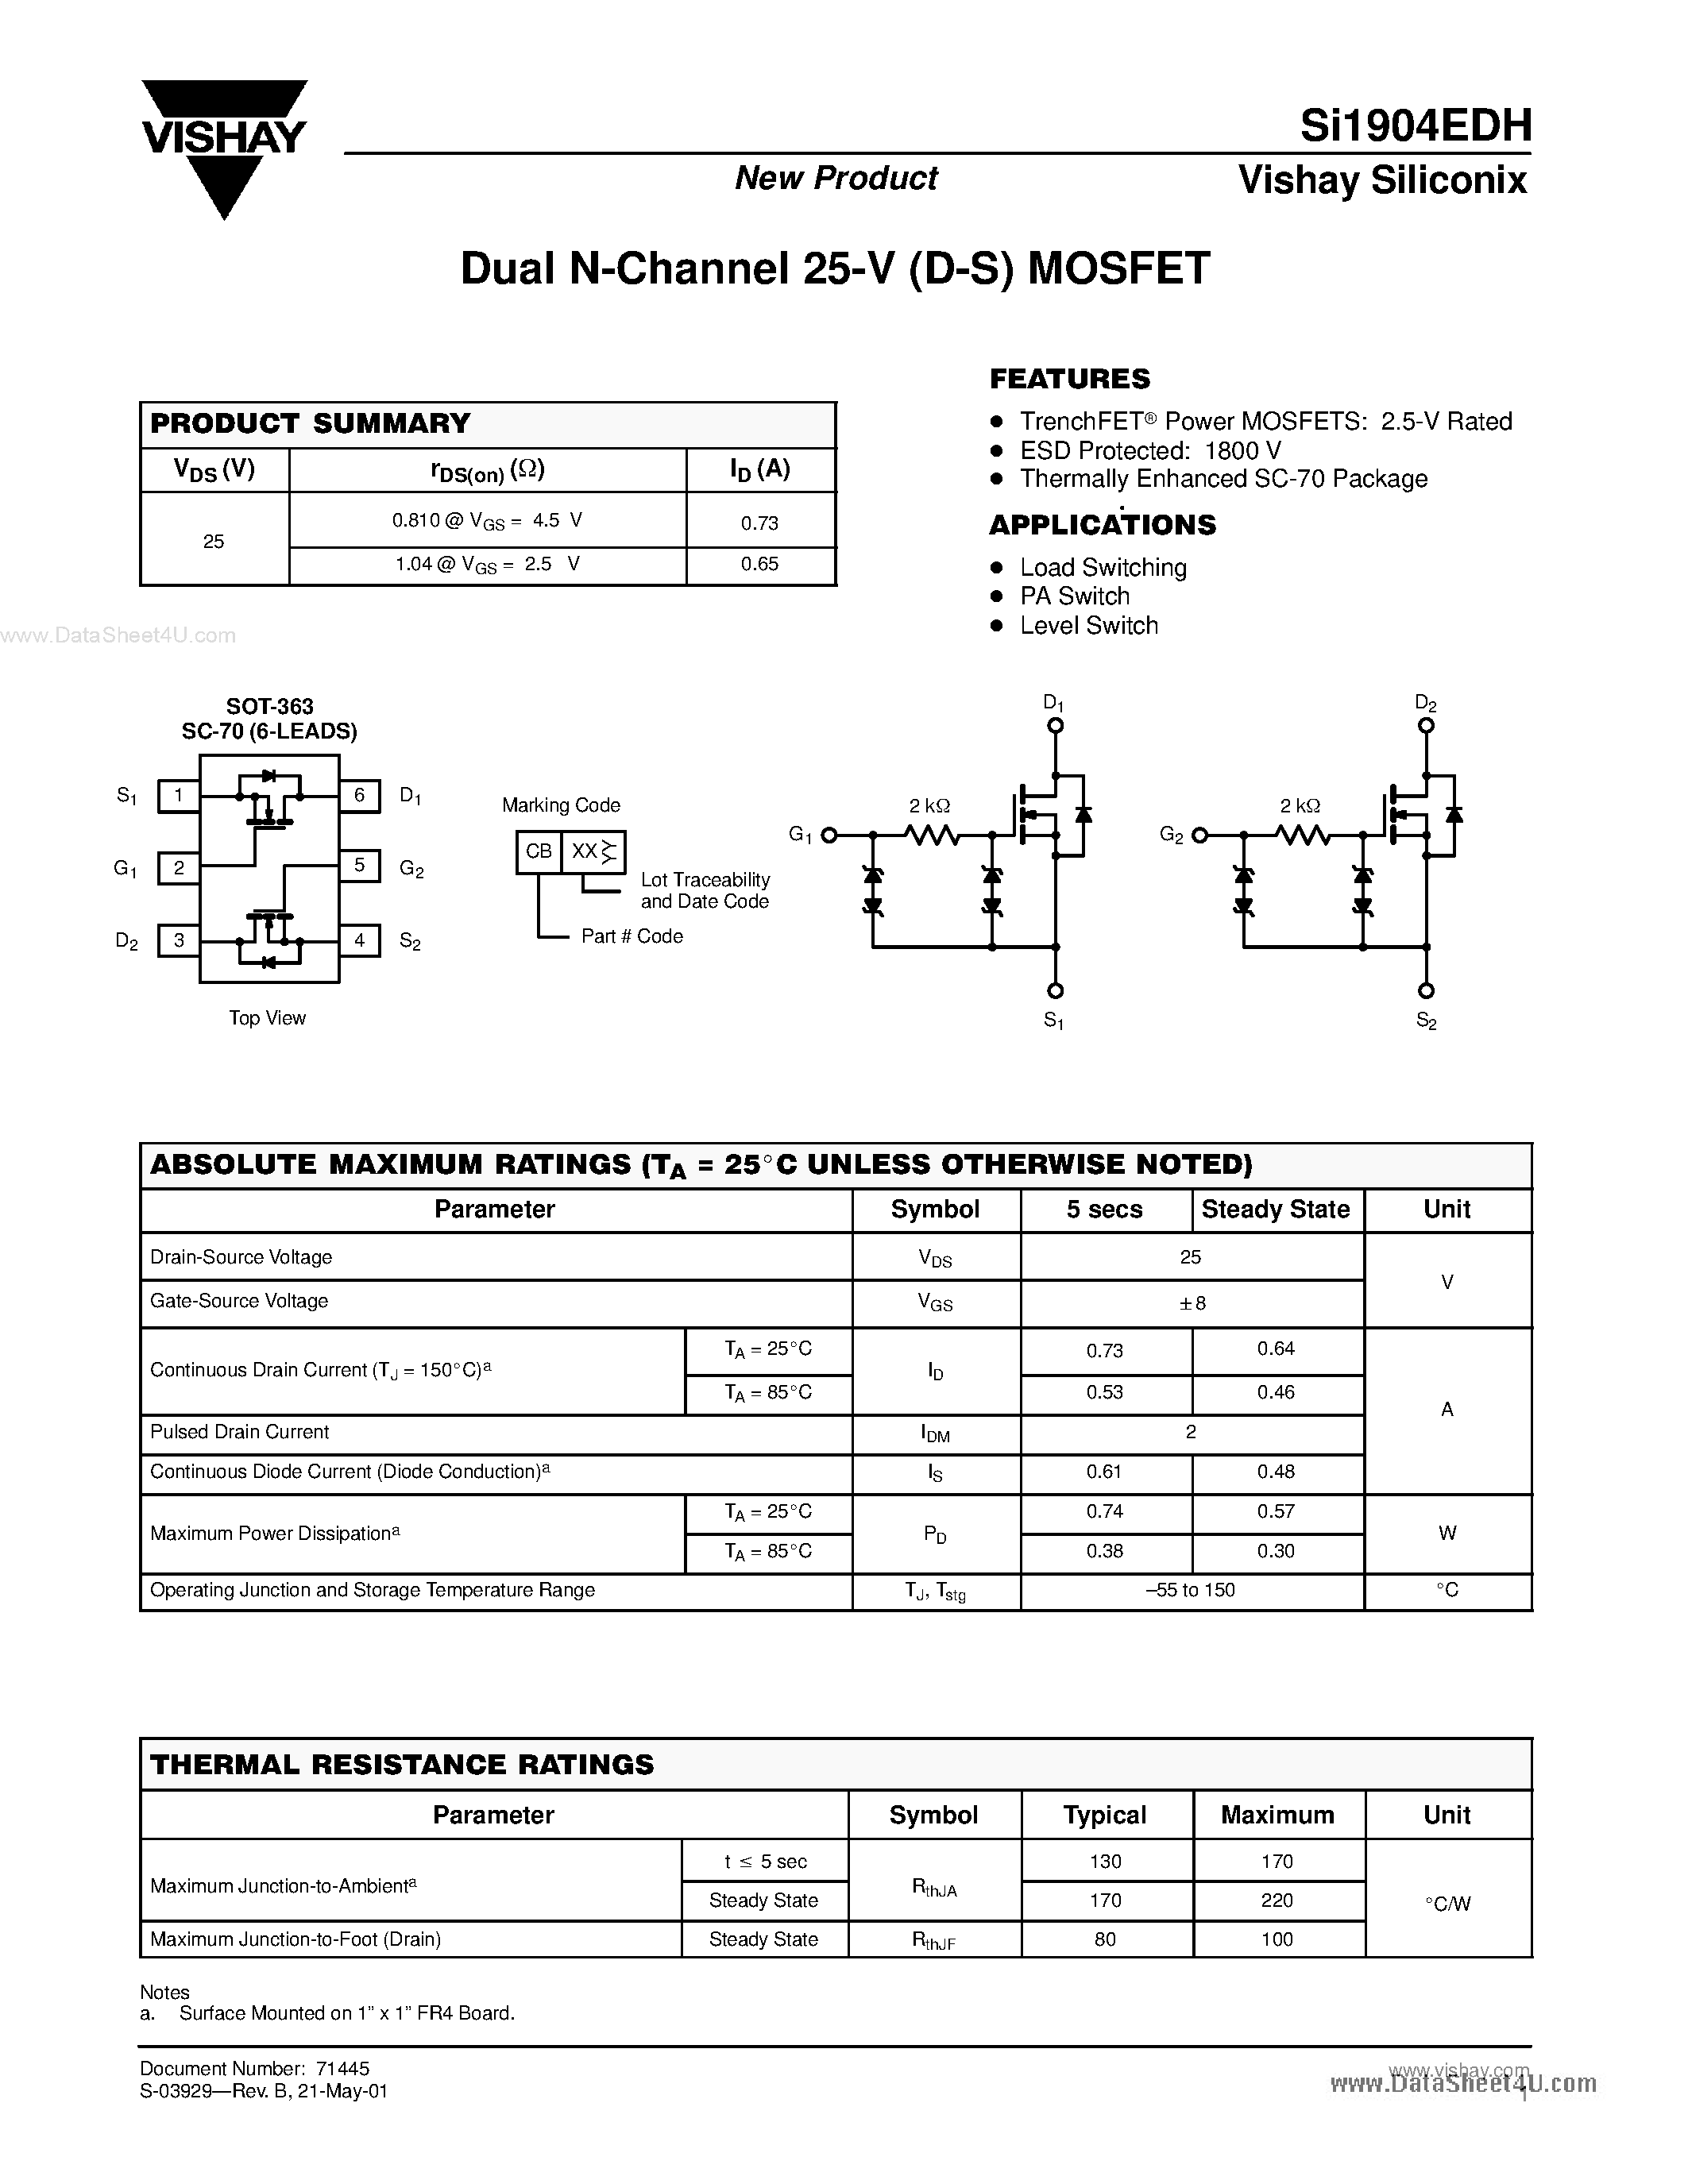 Datasheet SI1904EDH - DUAL N-CHANNEL 25-V (D-S) MOSFET page 1